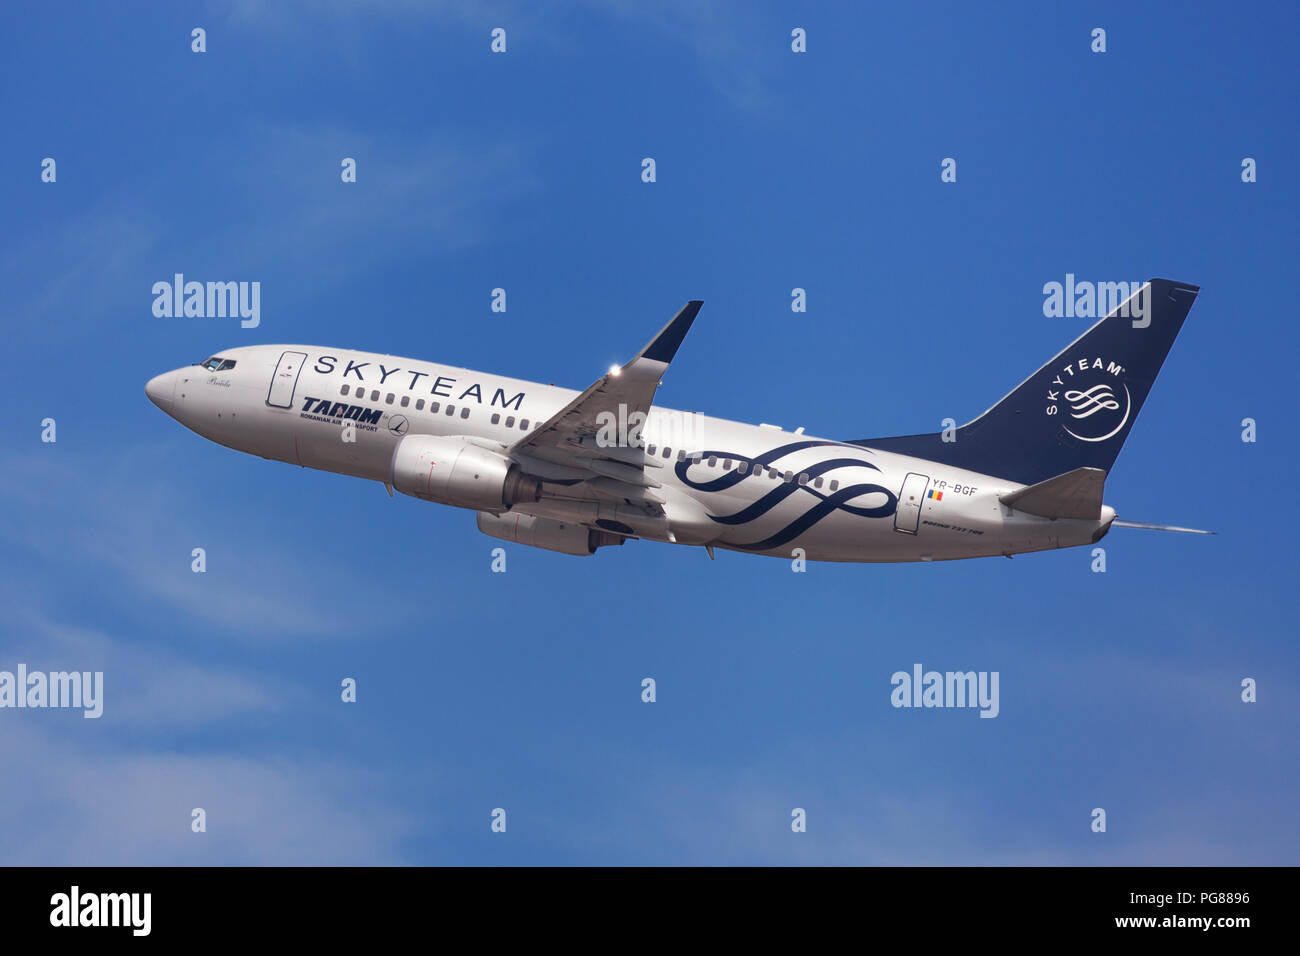 Barcelona, Spain - August 21, 2018: Tarom Boeing 737-700 with Skyteam livery taking off from El Prat Airport in Barcelona, Spain. Stock Photo